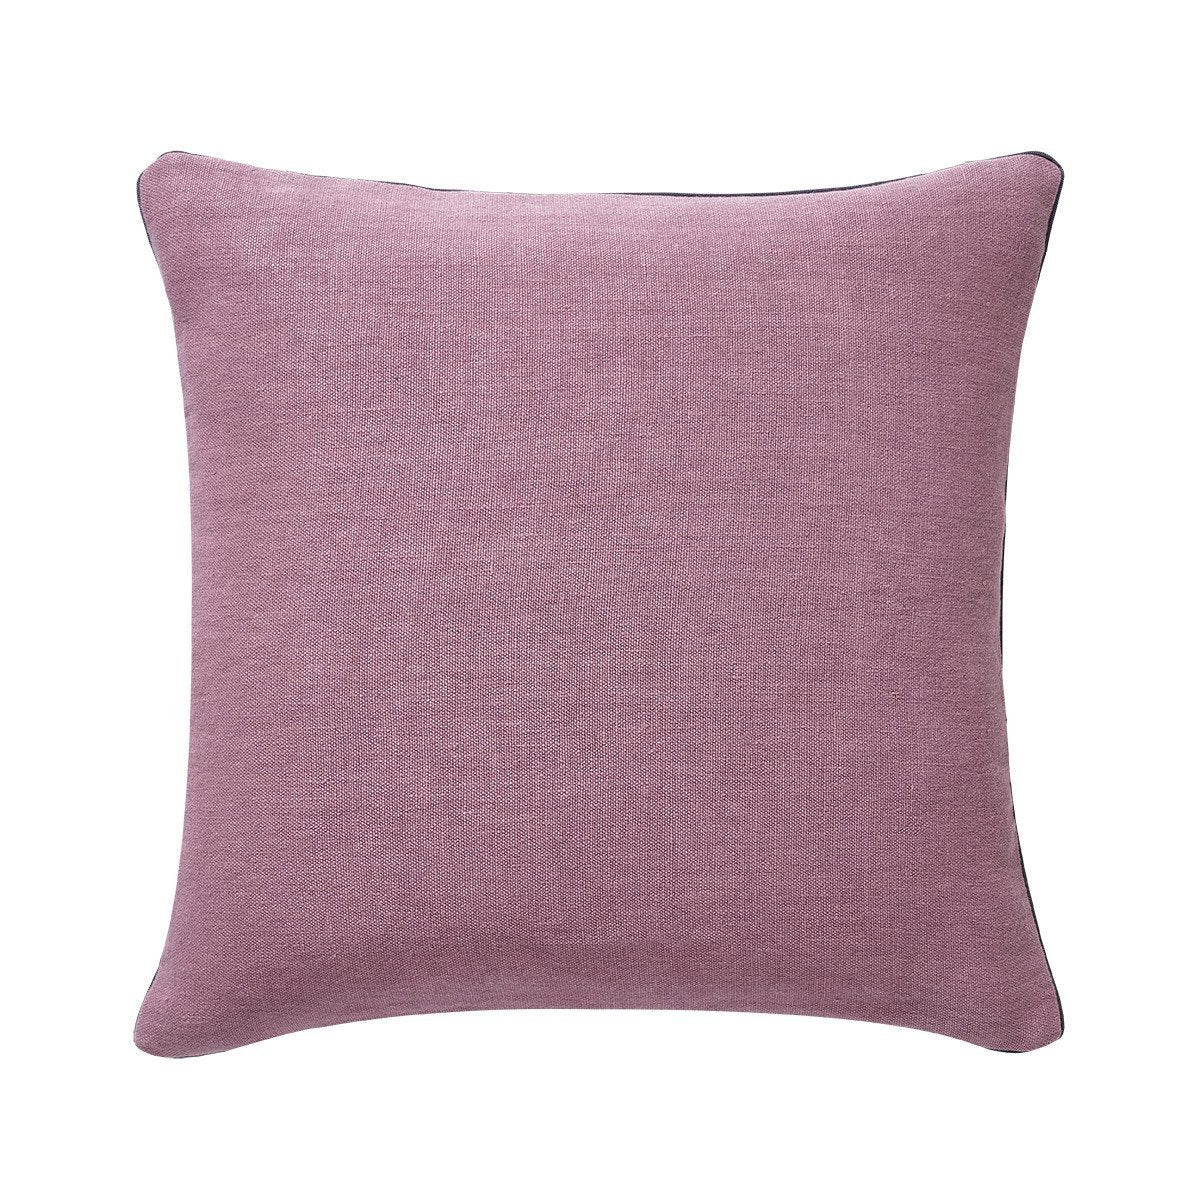 Pigment Blush Decorative Pillow by Iosis | Fig Linens and Home